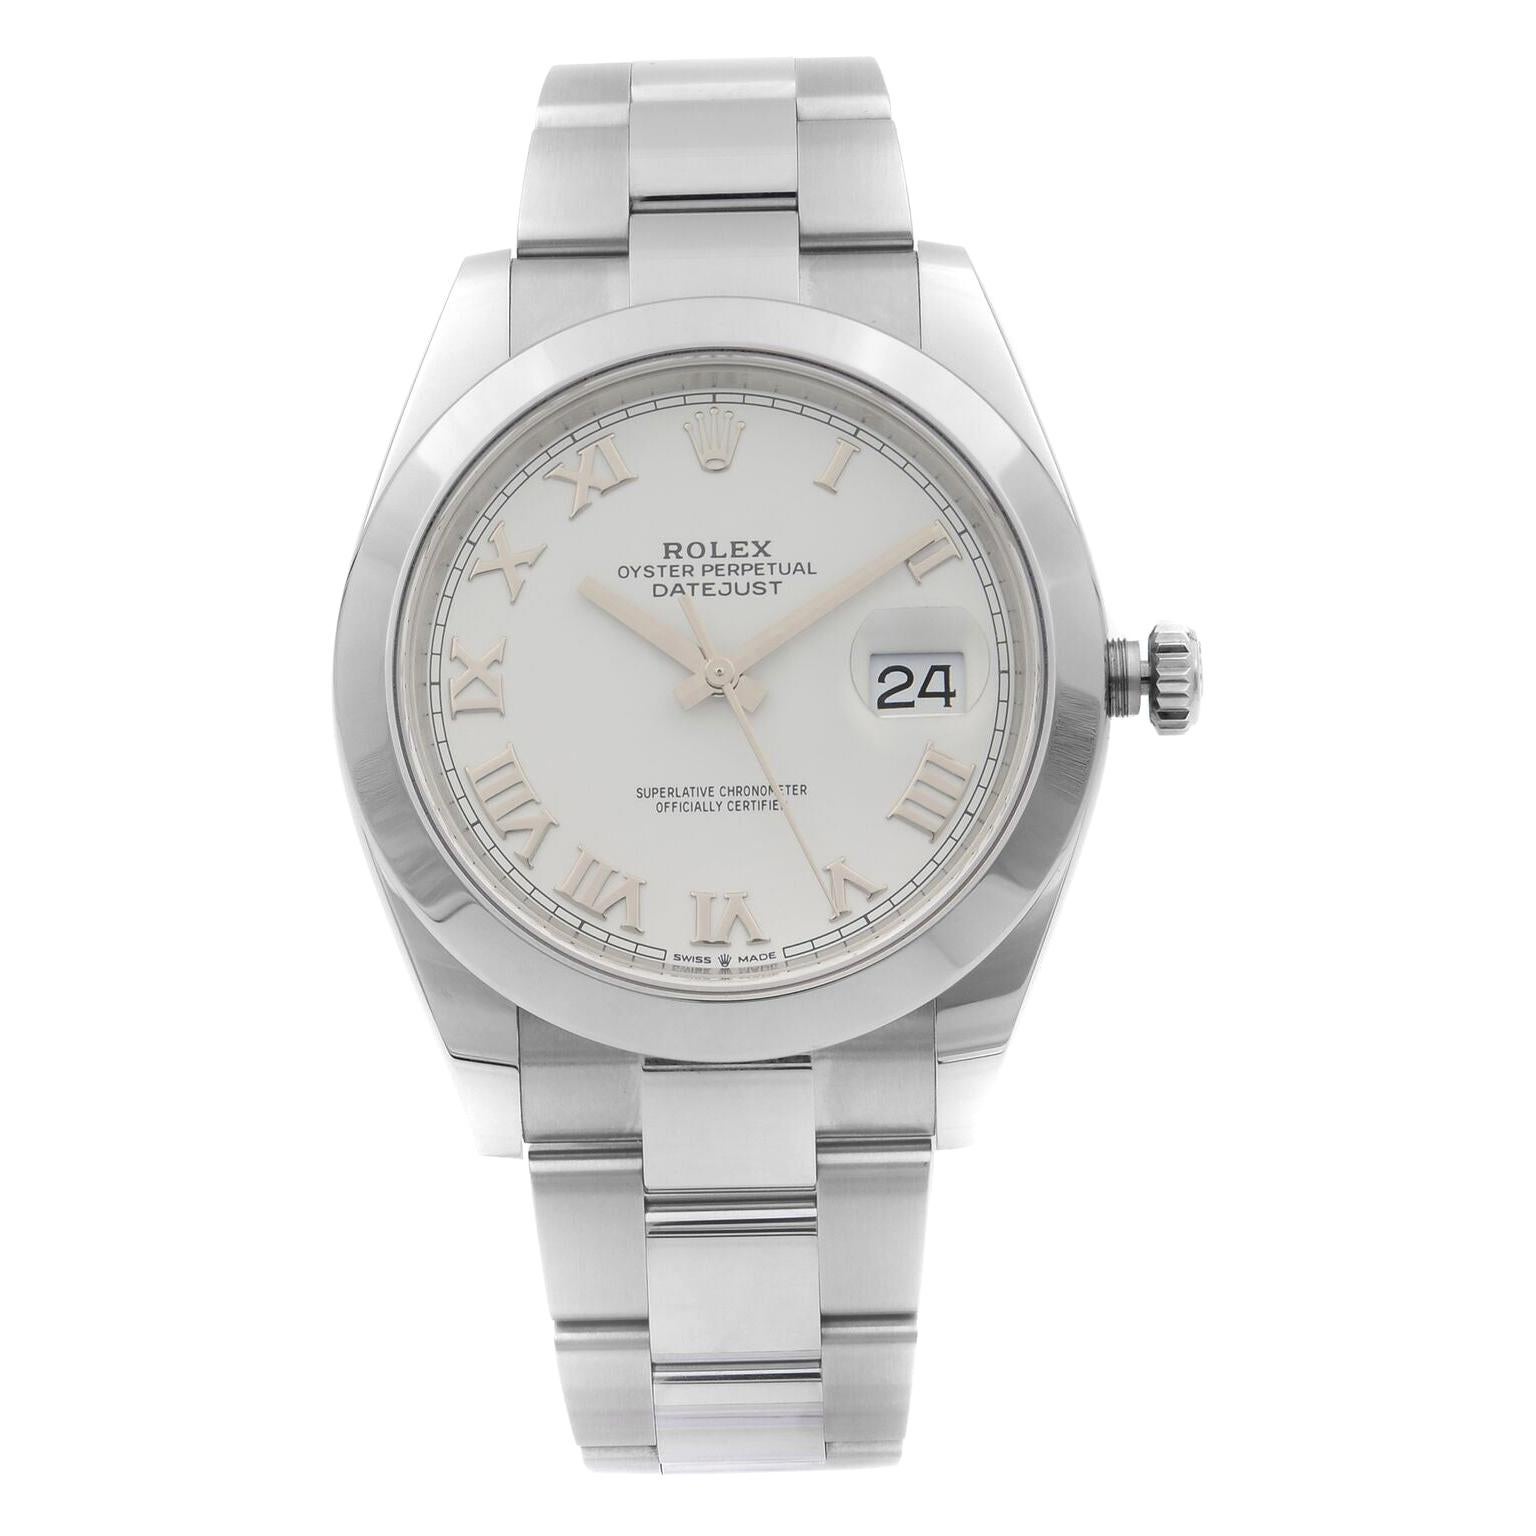 Rolex Datejust Stainless Steel White Roman Dial Automatic Men's Watch 126300